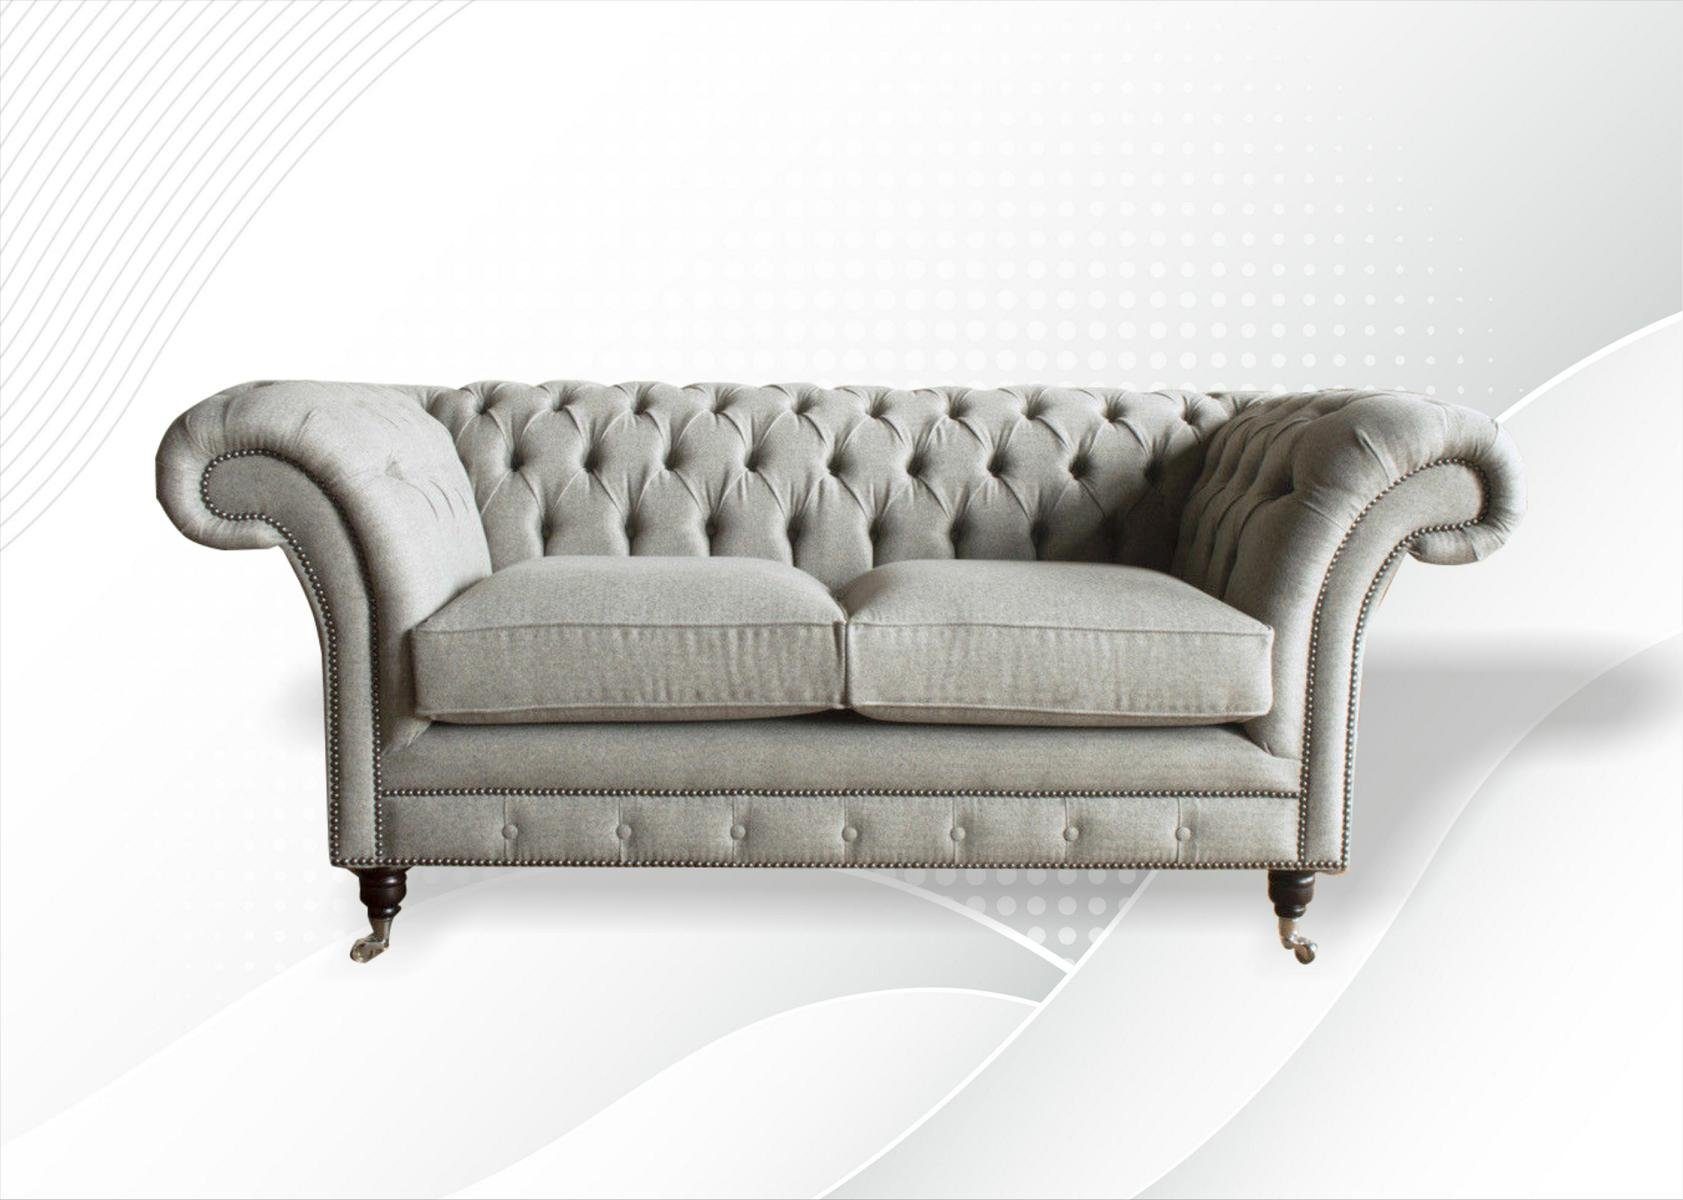 JVmoebel Chesterfield-Sofa, Chesterfield 2 Sitzer Design Sofa Couch 185 cm | Chesterfield-Sofas